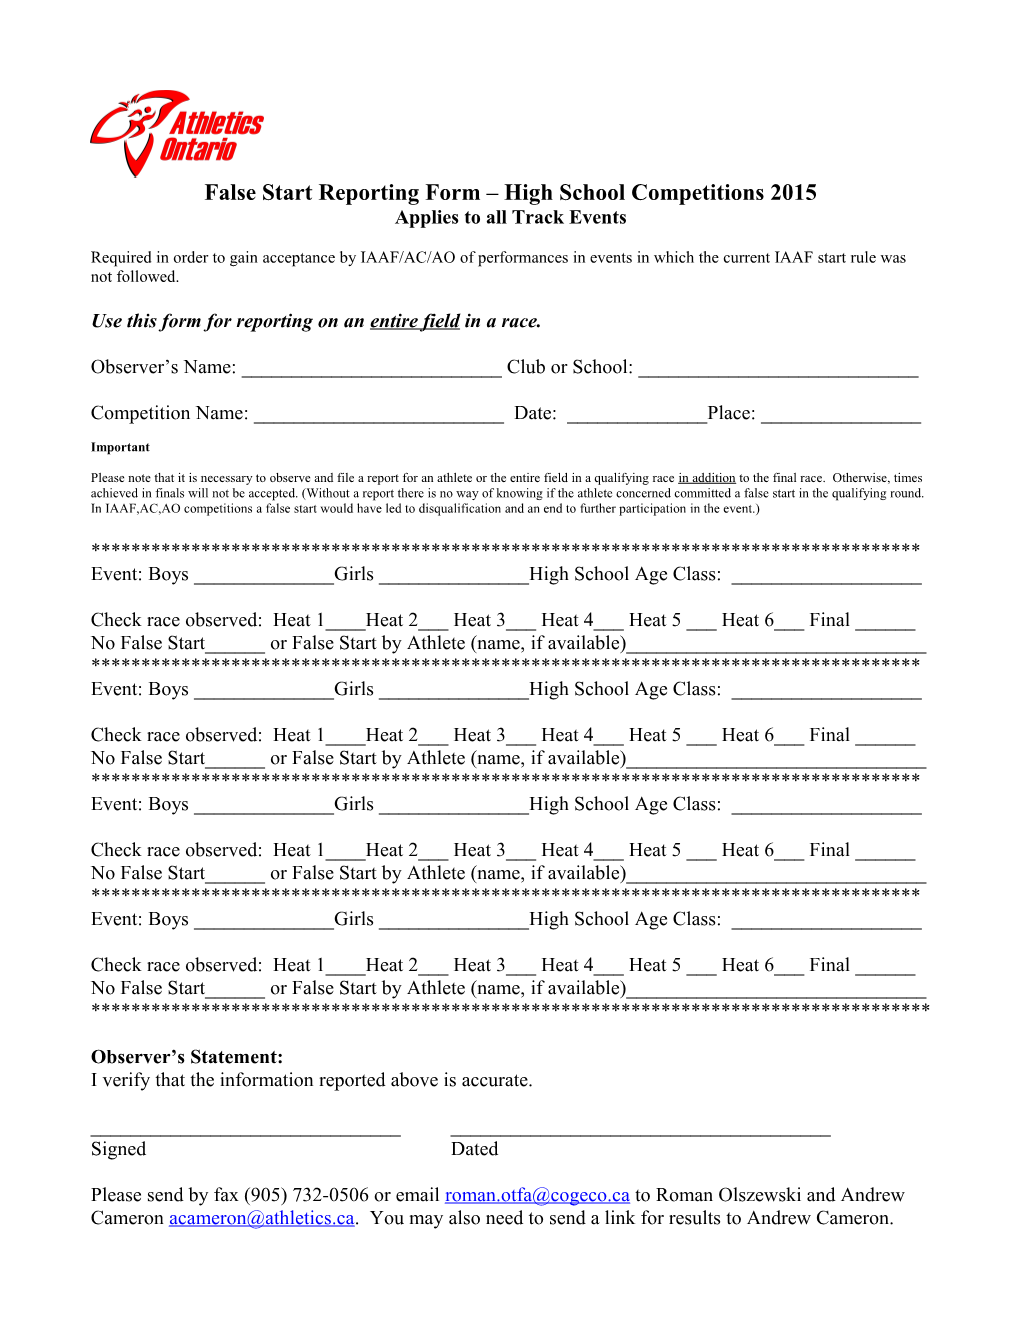 False Starts Reporting Form High School Competitions 2014